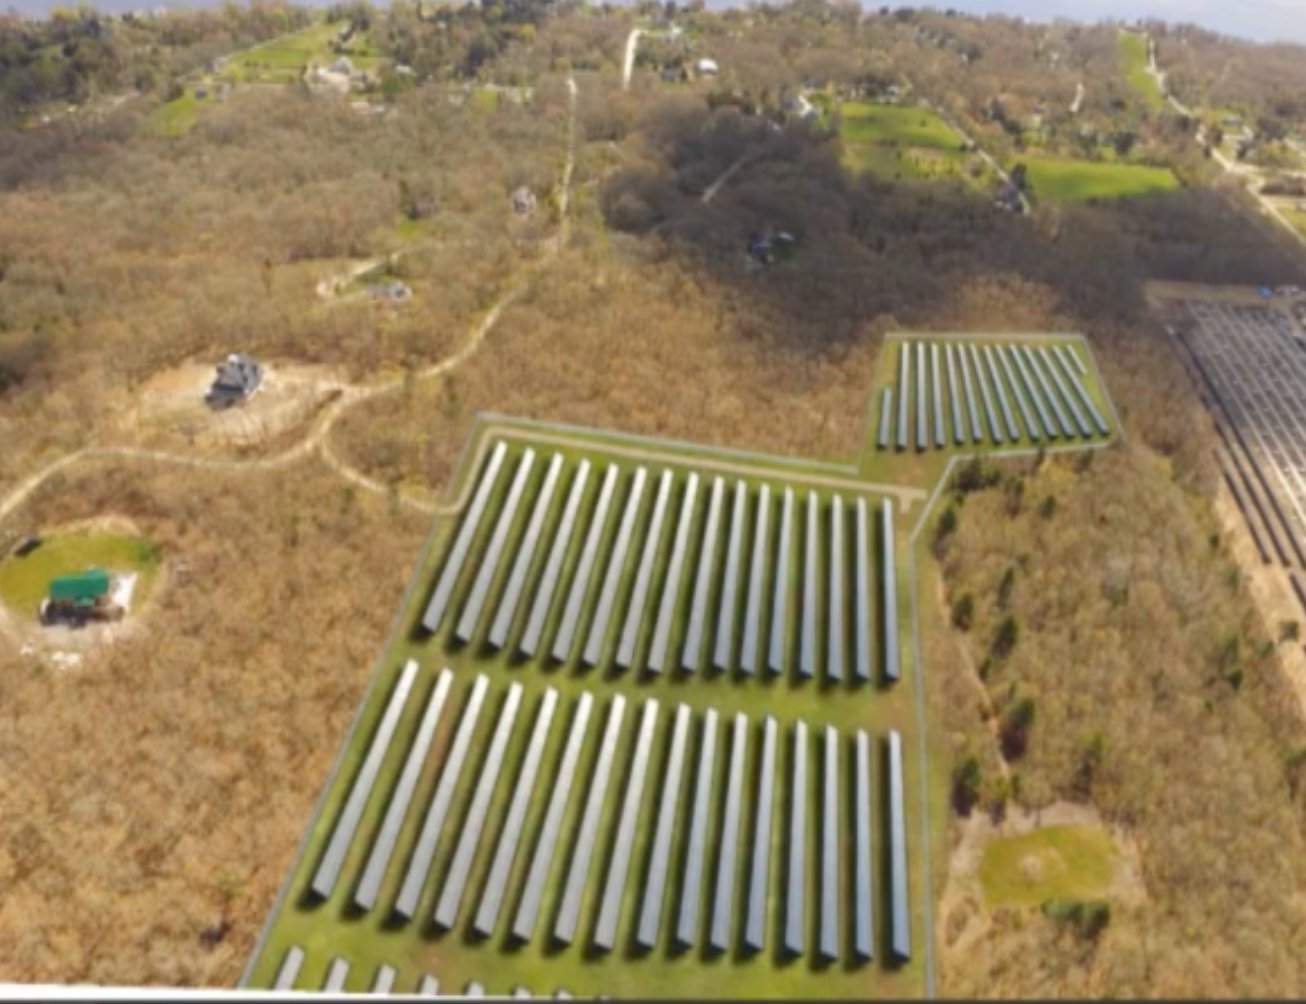 Developer’s rendering shows solar panels on land between Drift Road and Route 88 along Soules’ Way (an additional section is barely visible in the foreground). This is from a proposal before the town two years ago.